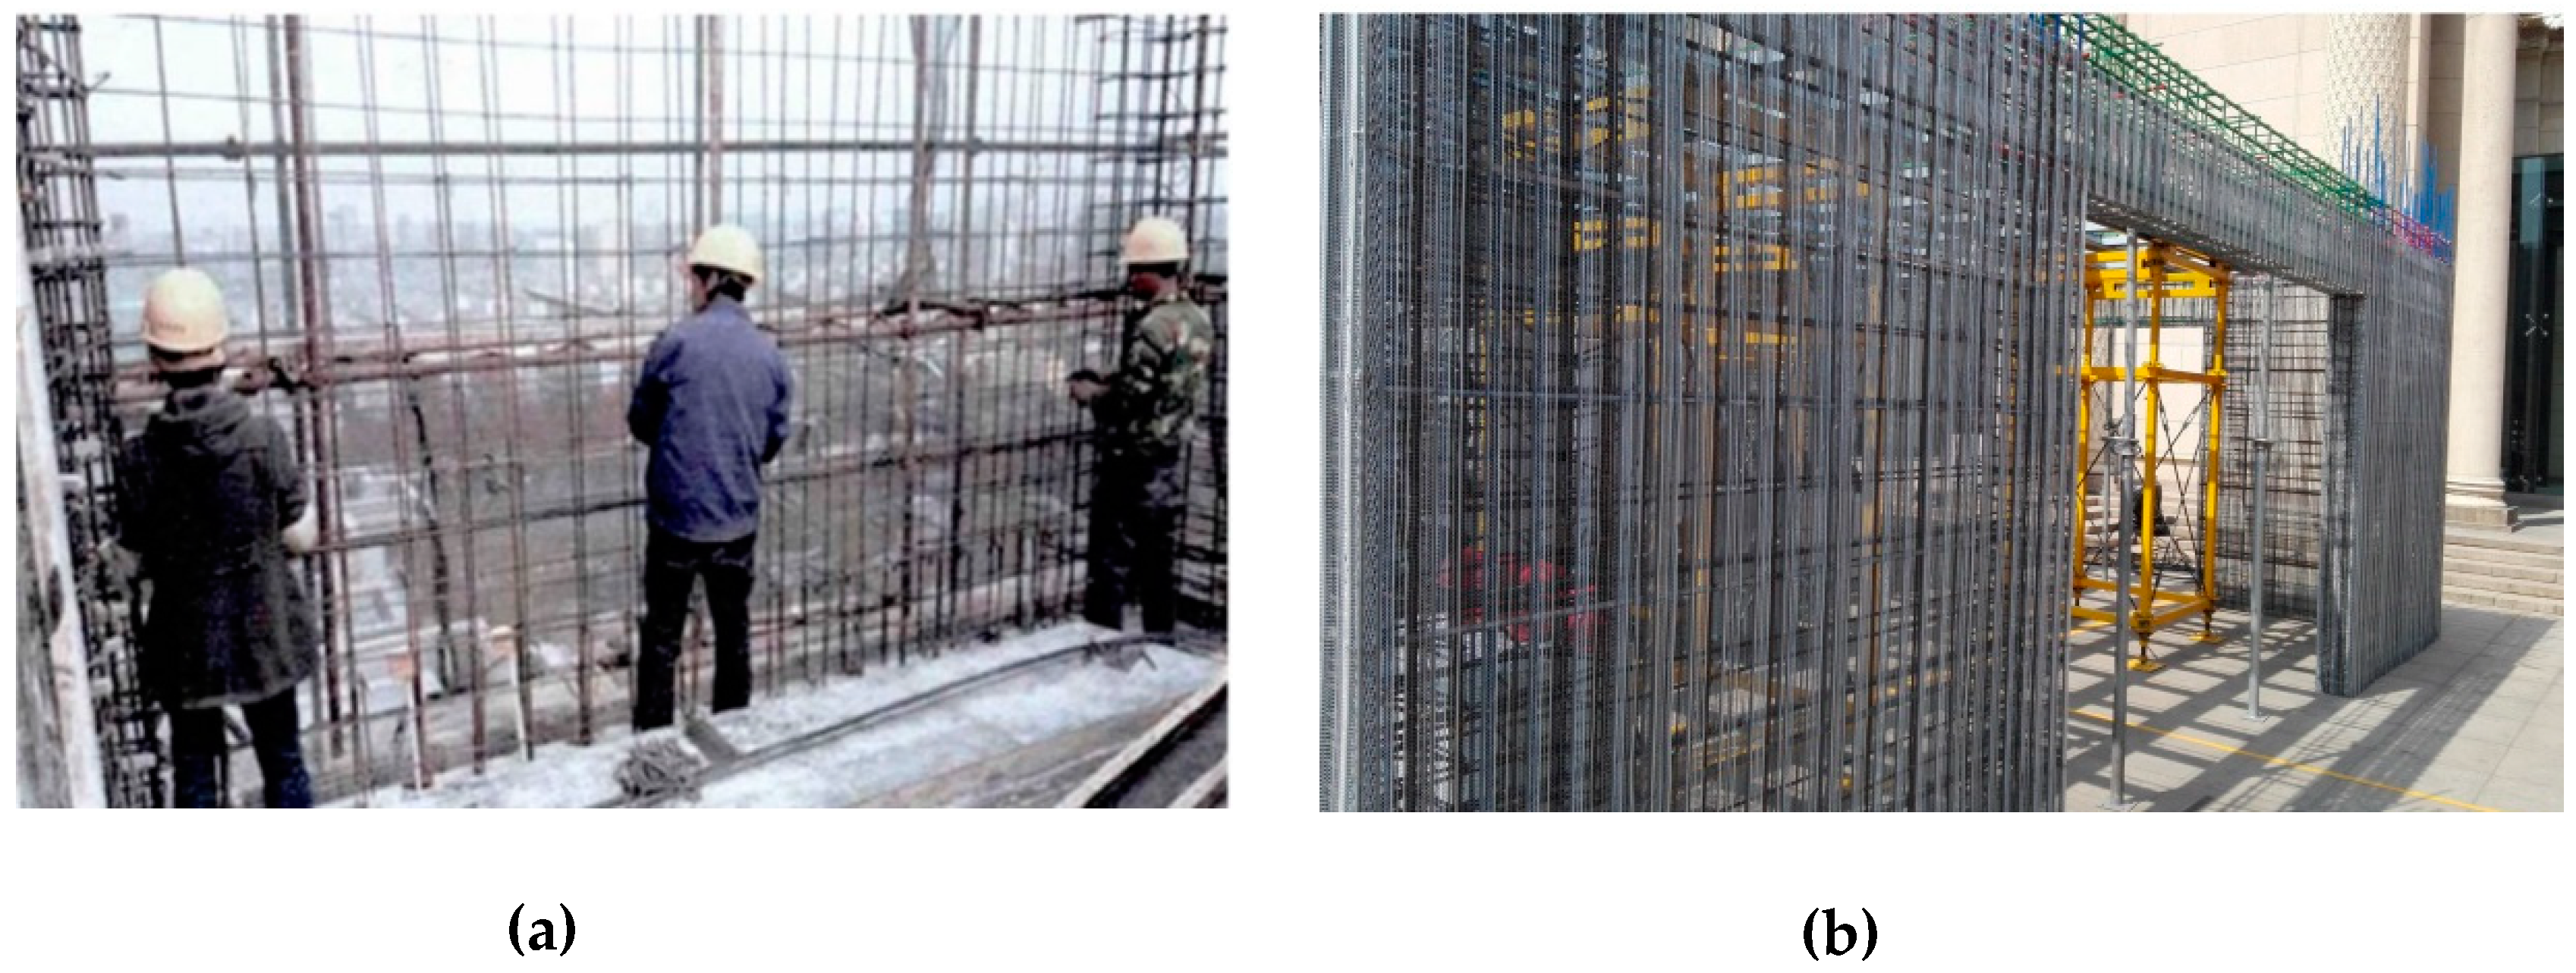 Sustainability | Free Full-Text | Cradle-to-Site Carbon Emissions  Assessment of Prefabricated Rebar Cages for High-Rise Buildings in China